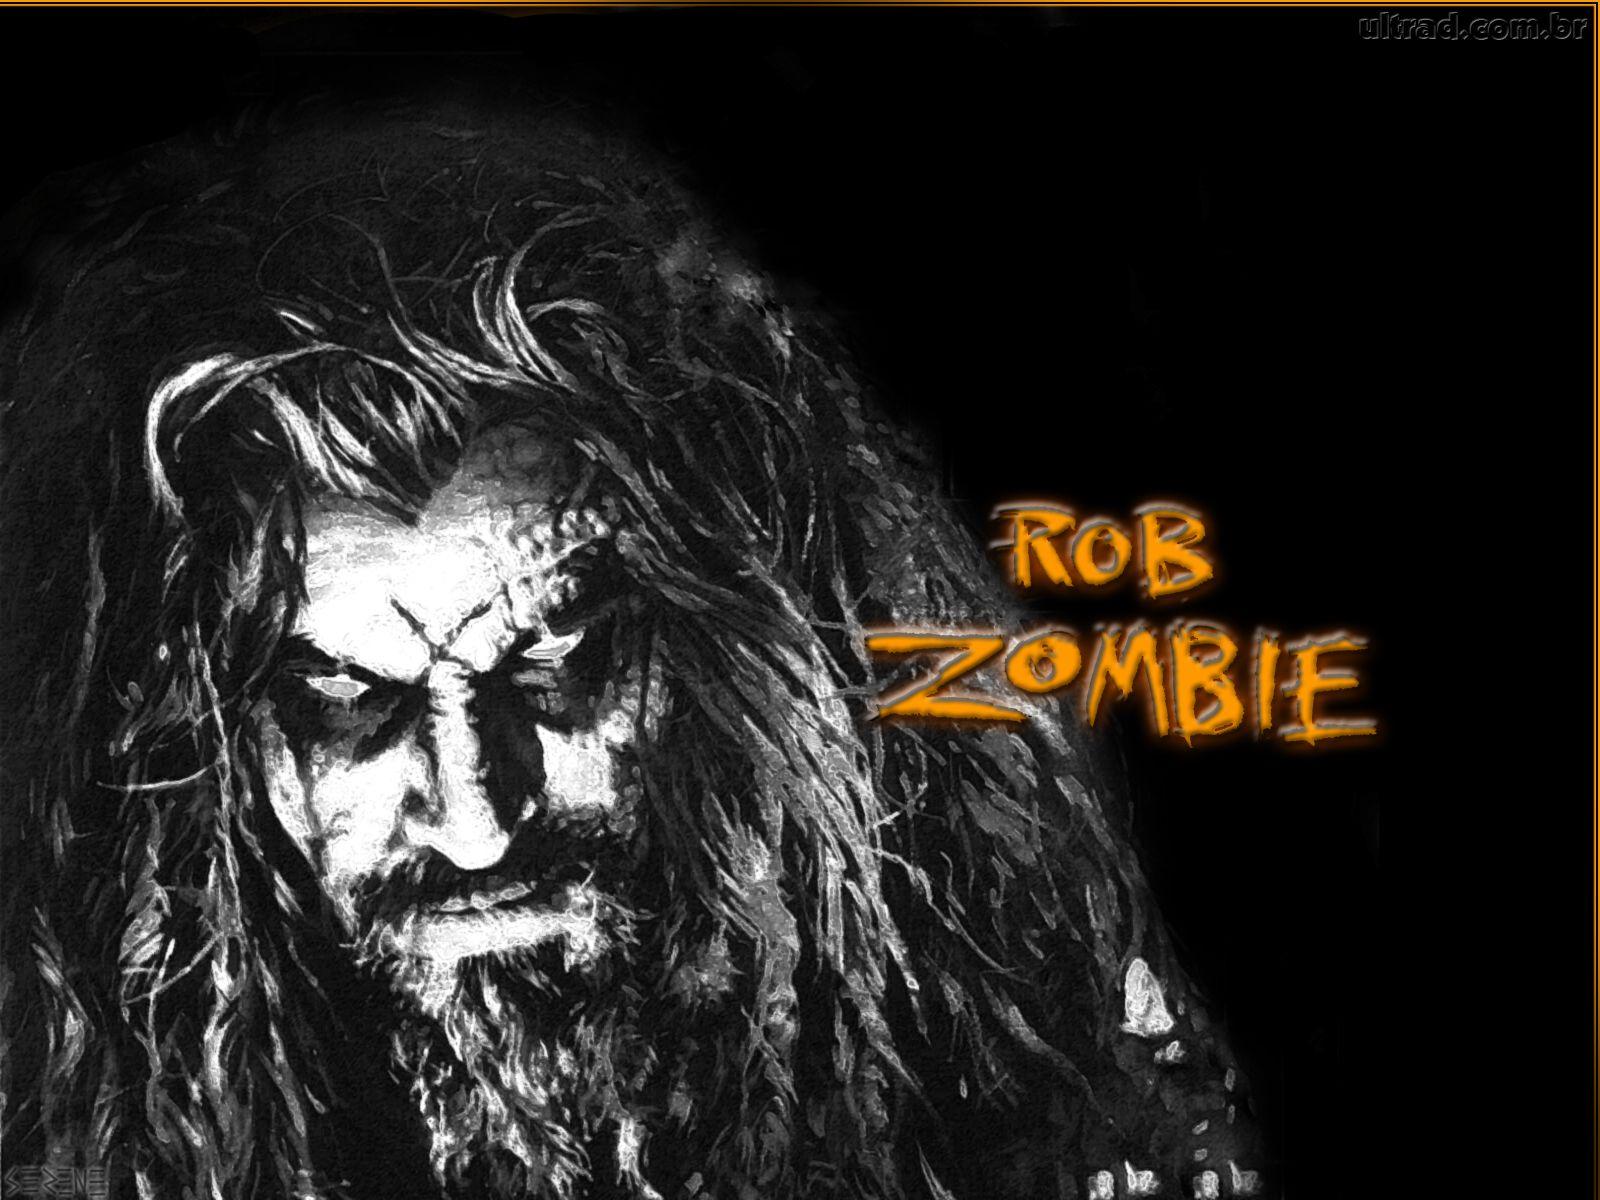 Rob Zombie Wallpapers - Wallpaper Cave Rob Zombie Band Wallpaper 2013.